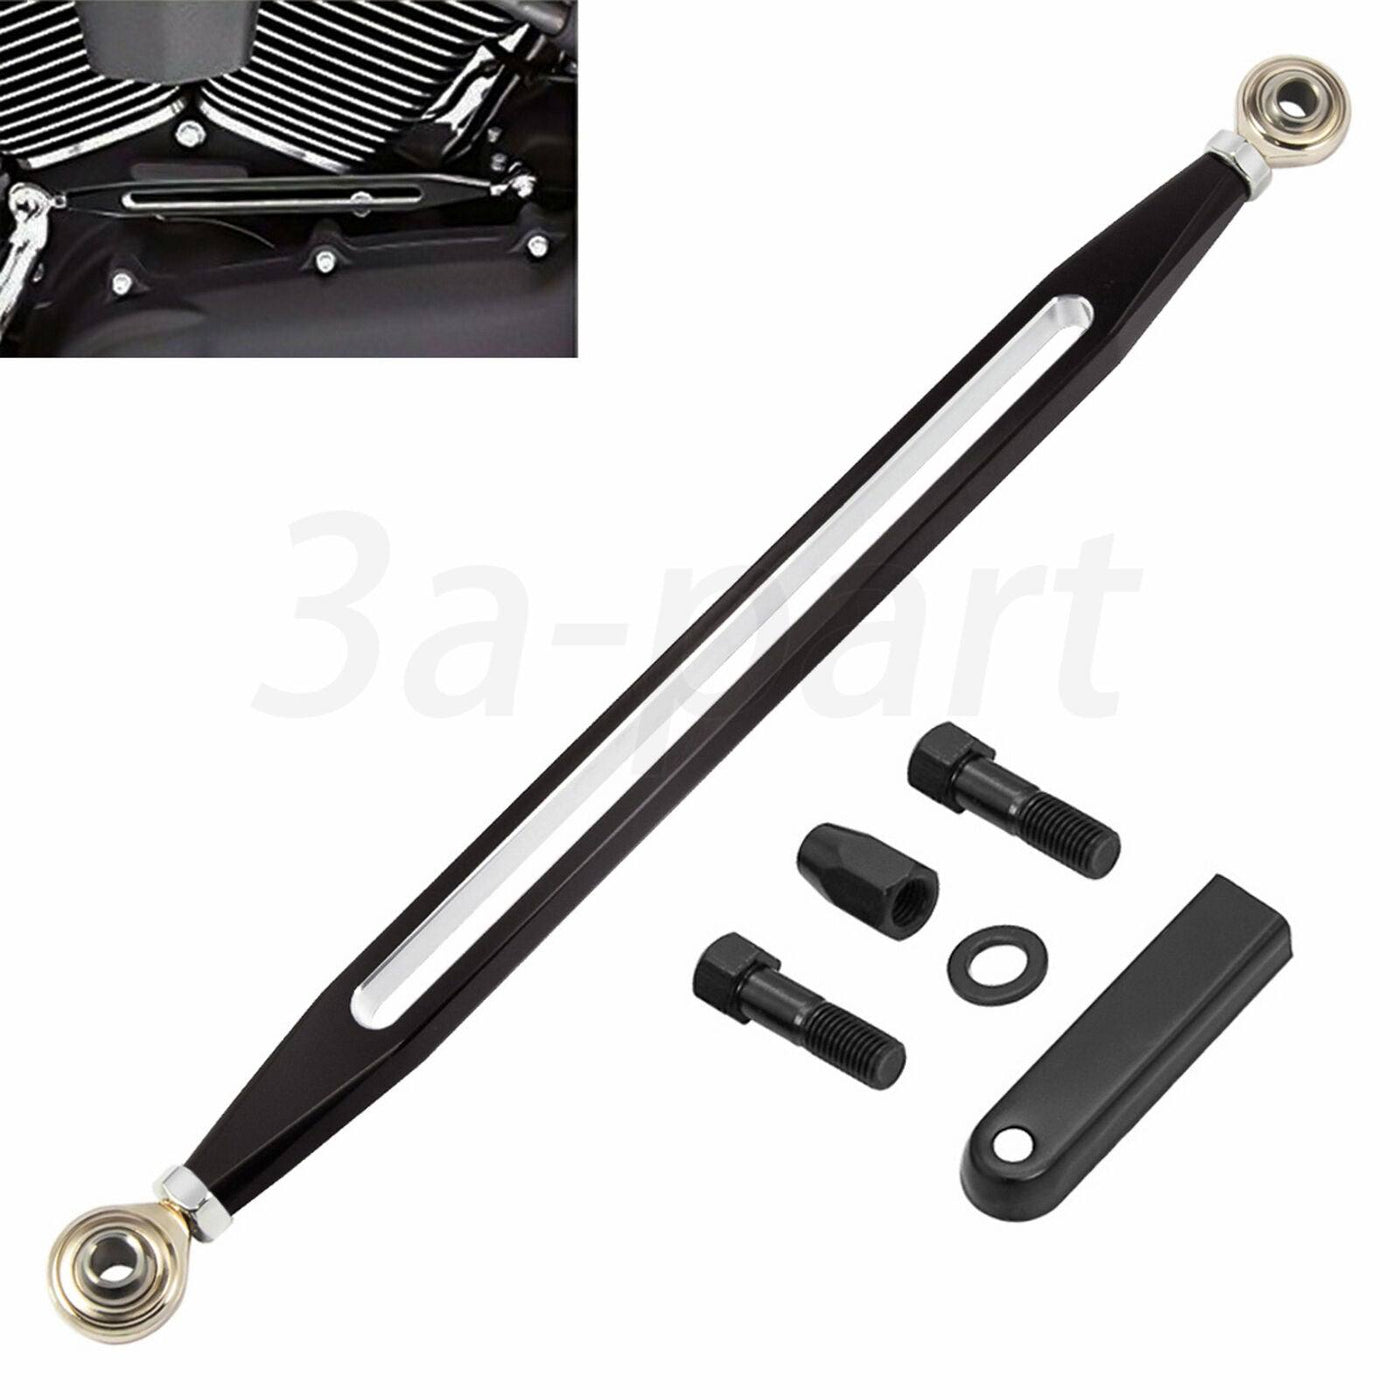 Shift Linkage Shifter Gear Black Chrome Fit for Harley Touring Softail 1986-2022 - Moto Life Products